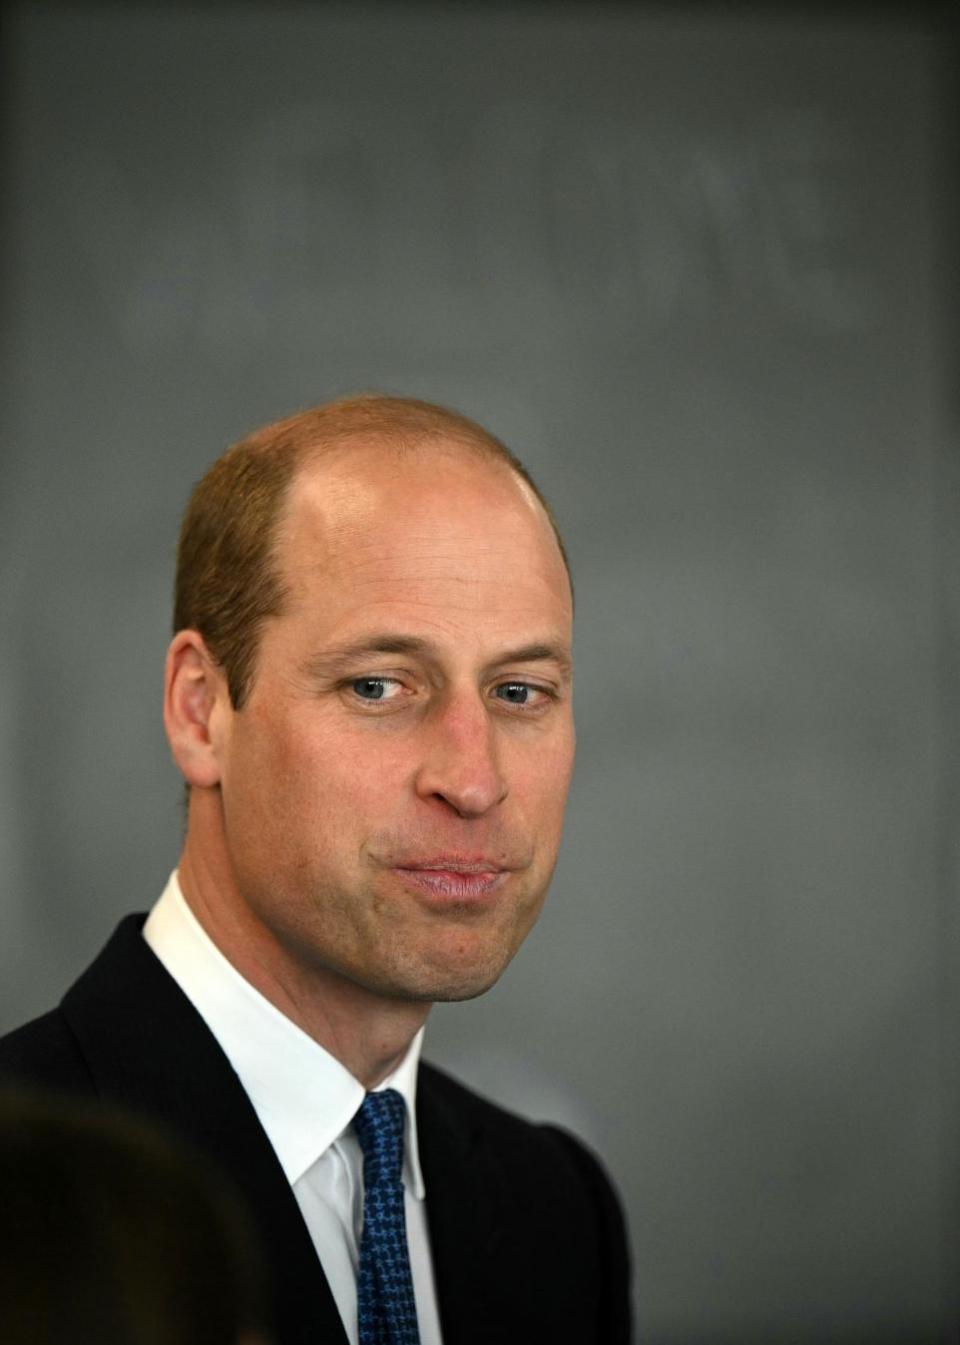 The Northern Echo: PRINCE WILLIAM